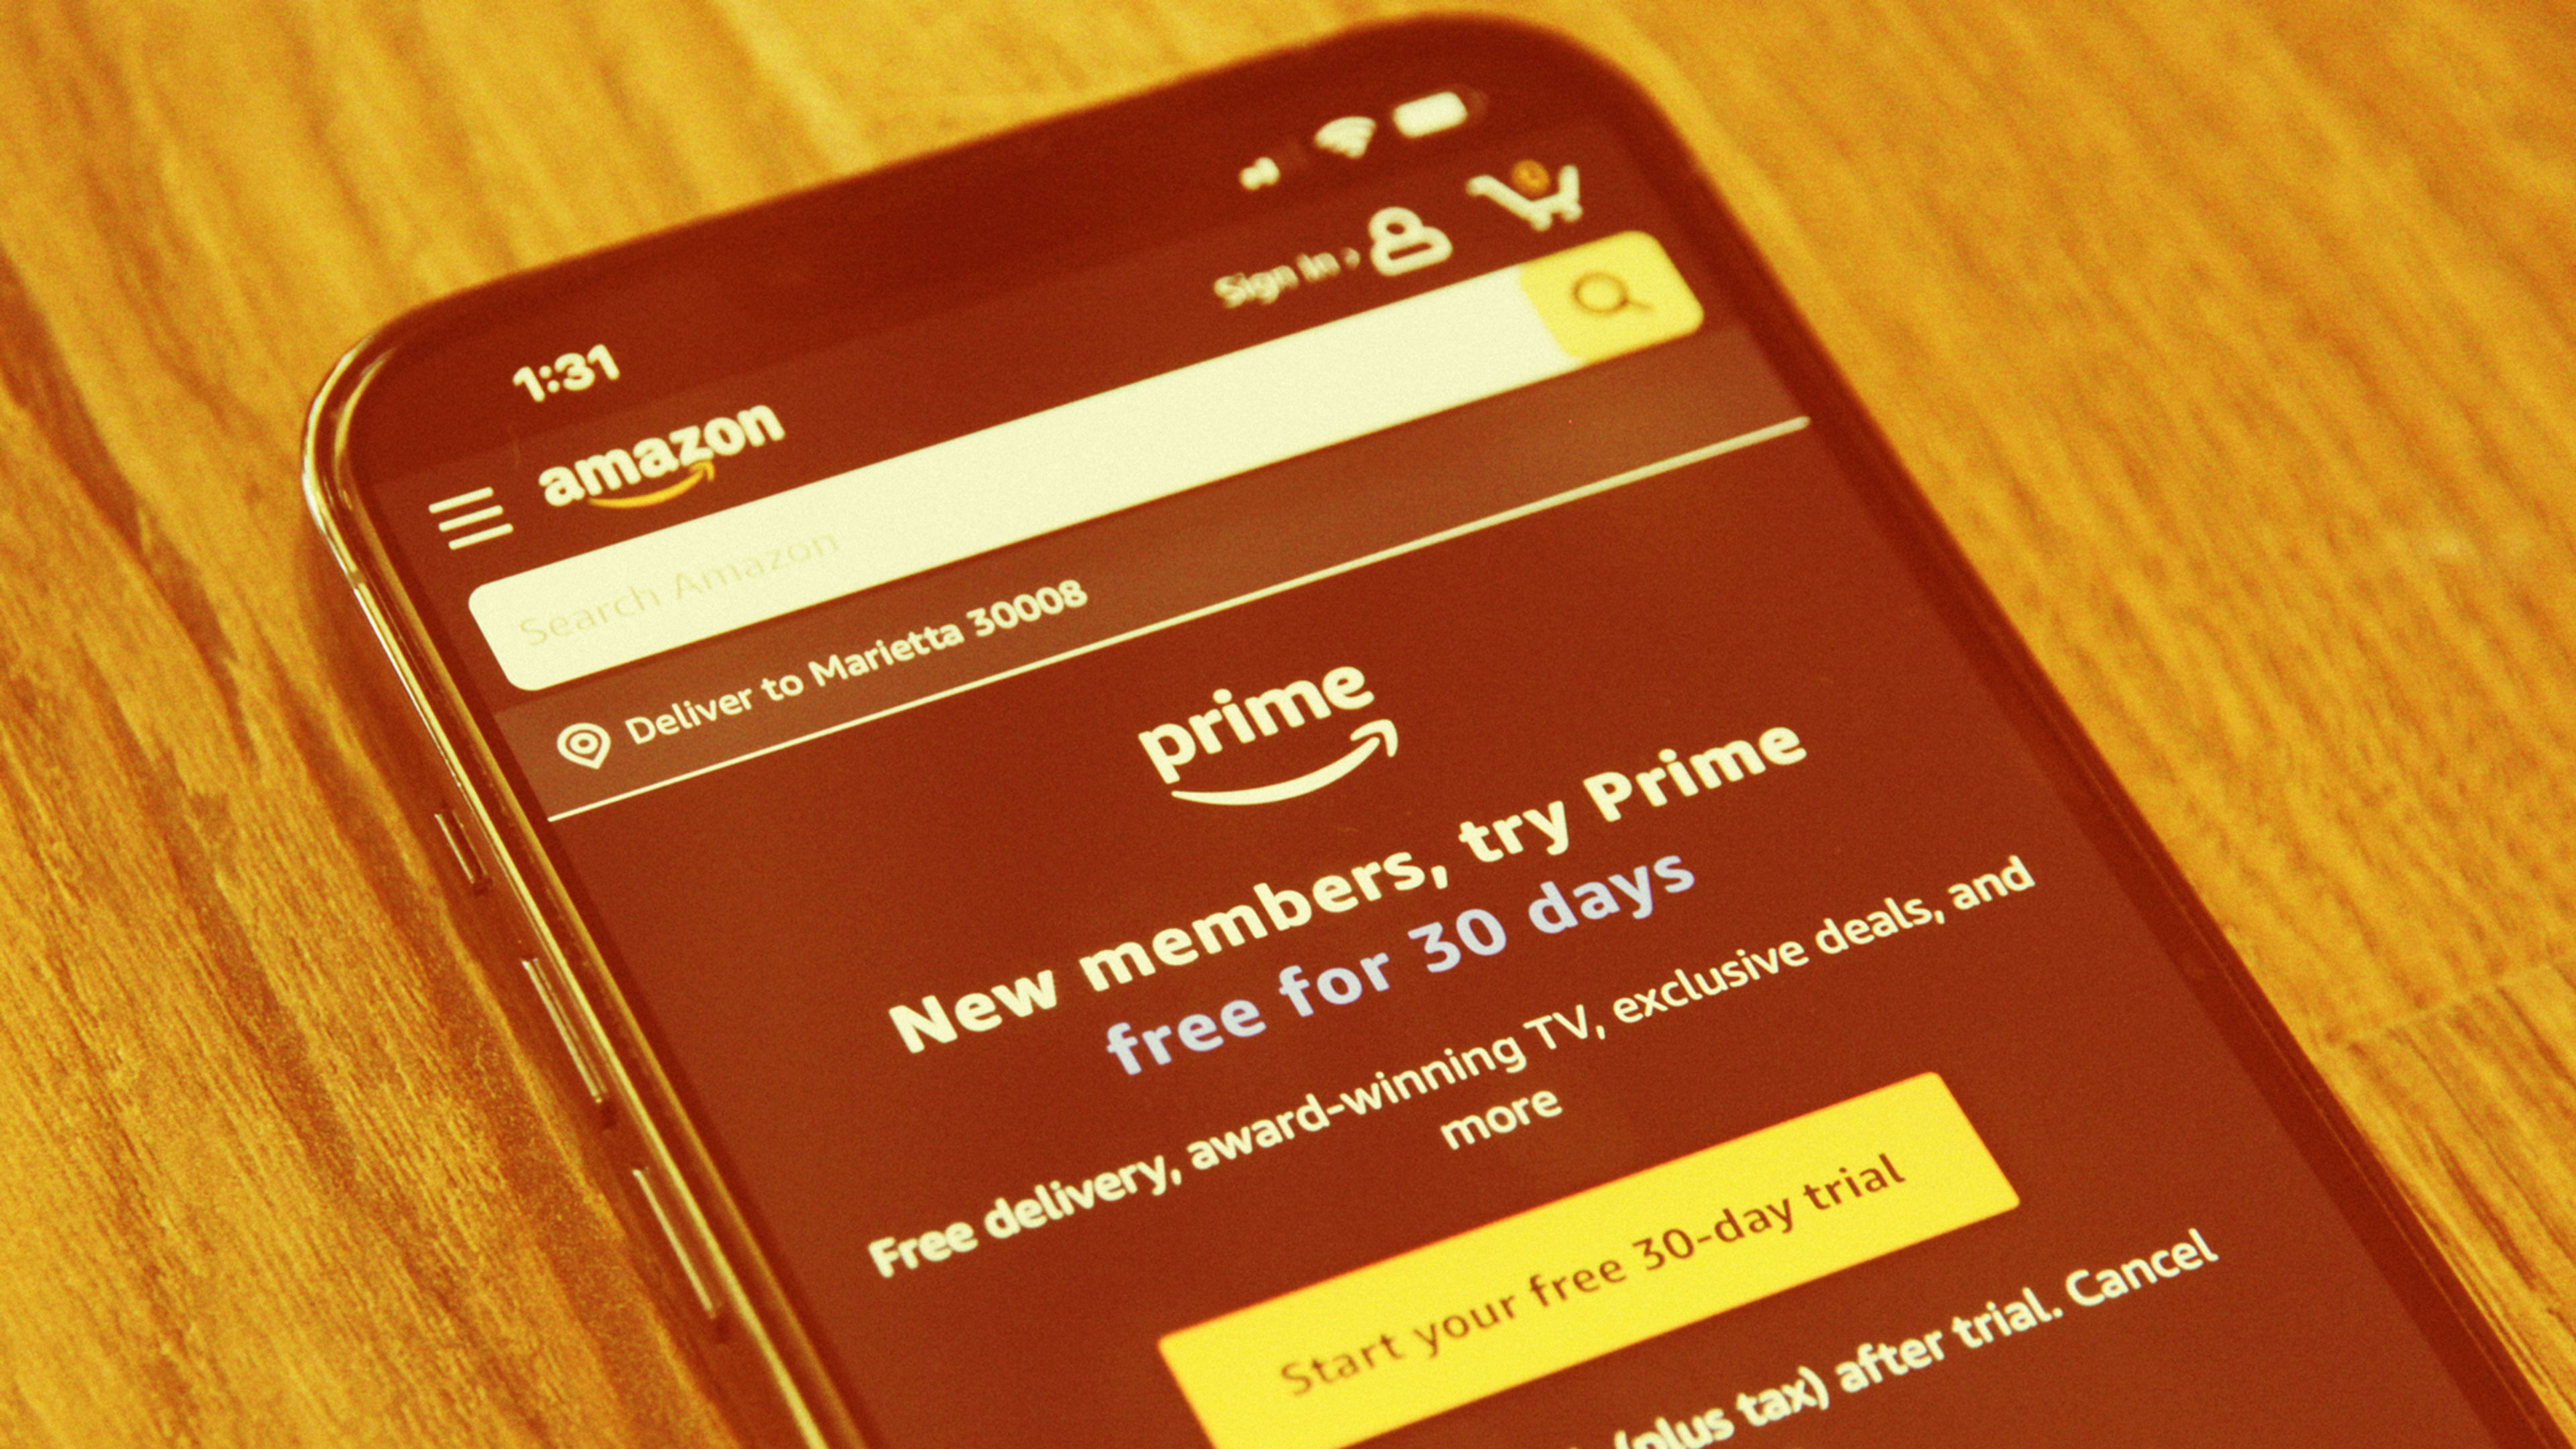 4 great Amazon Prime freebies you might not know you can get